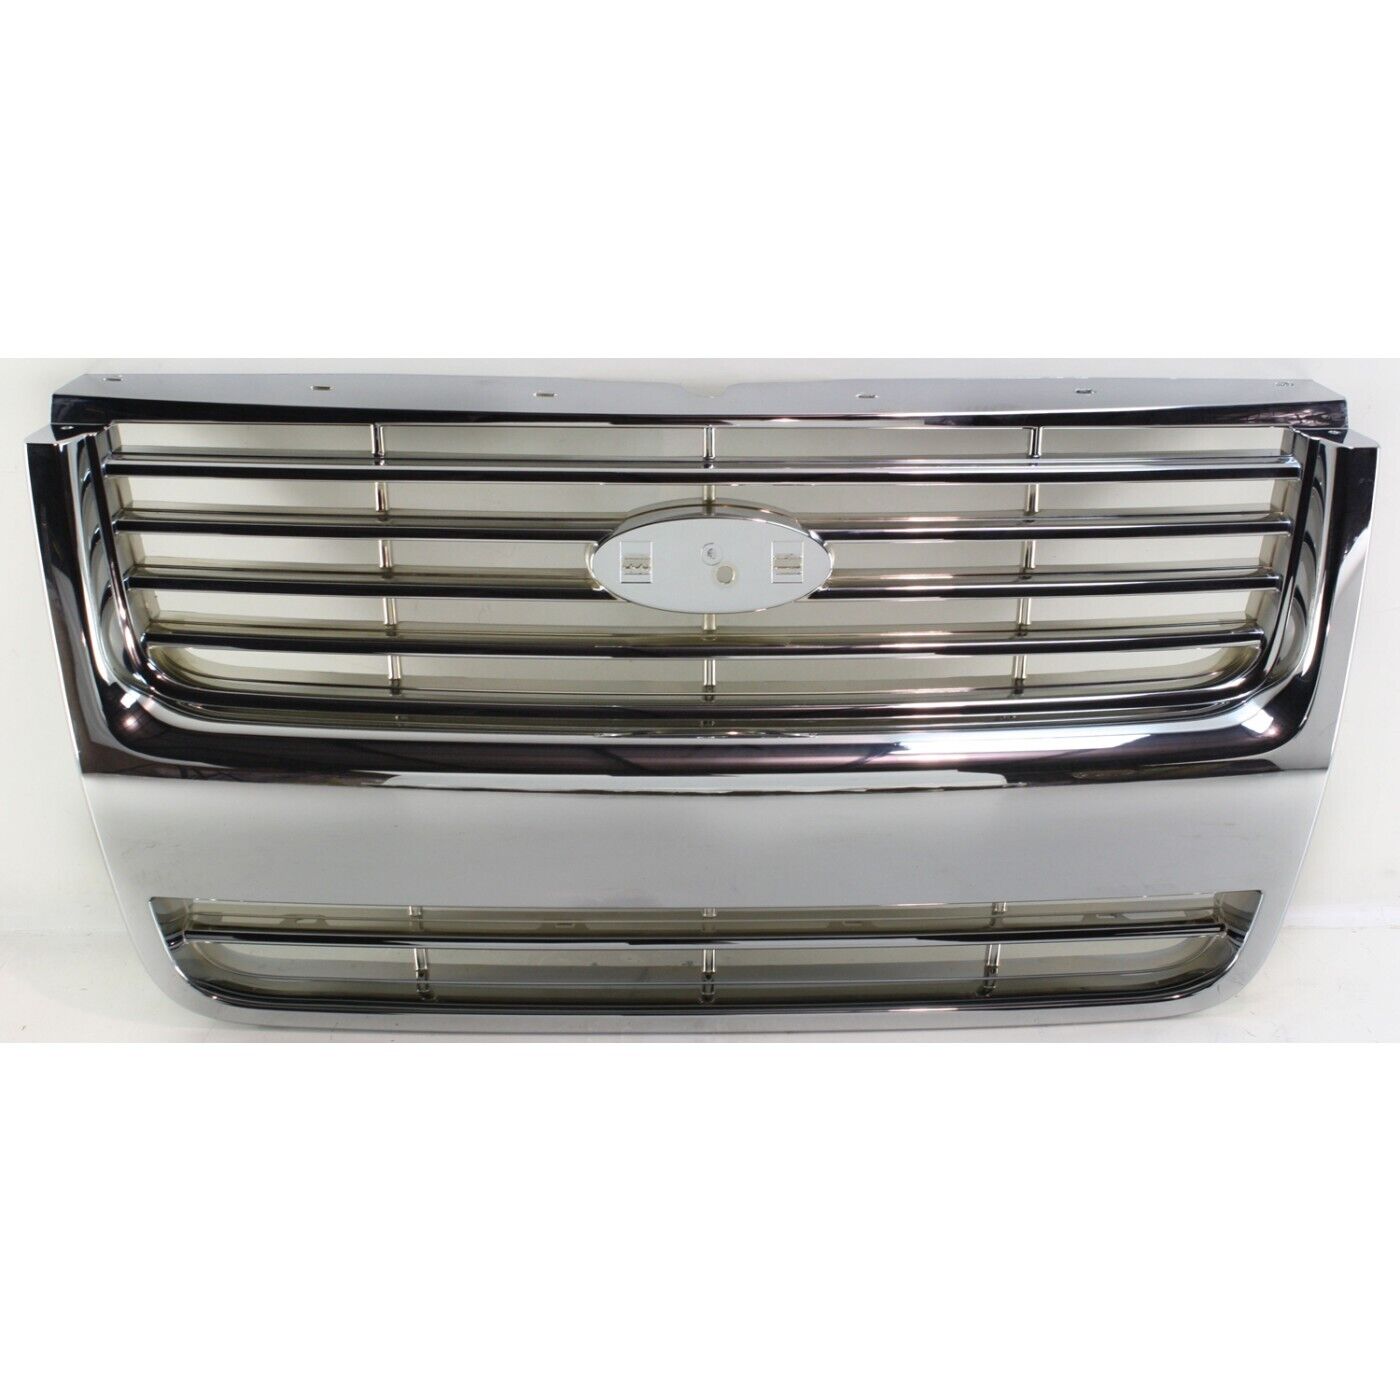 Grille For 2006-2008 Ford Explorer Chrome Shell and Insert with emblem provision